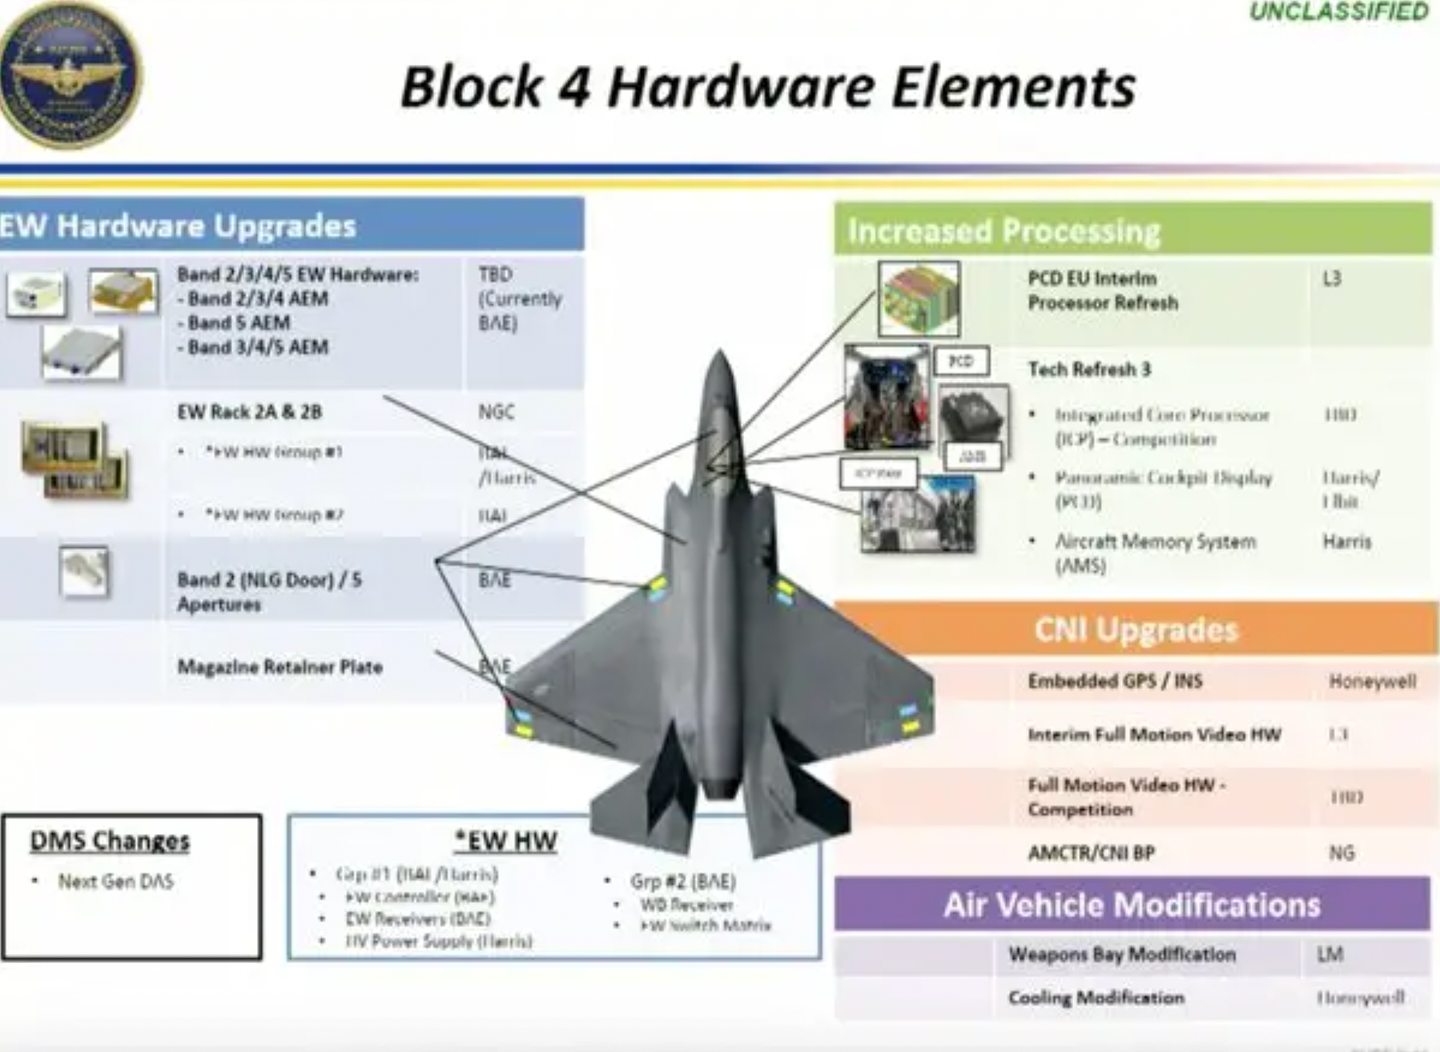 Some of the unclassified upgrades within Block 4. The exact configuration has not been publicly disclosed.&nbsp;<em>U.S. Department of Defense</em>